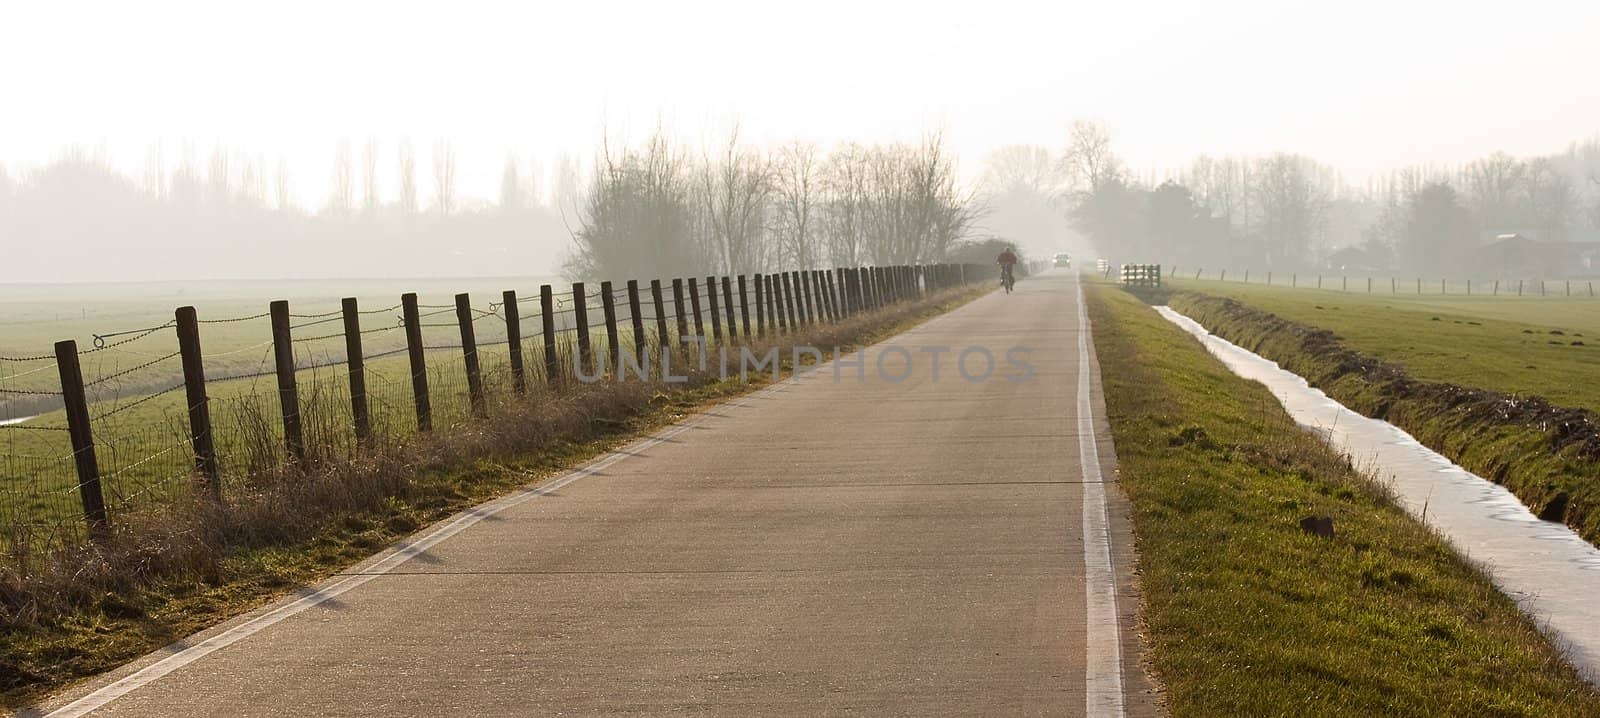 Polderroad on winterday by Colette